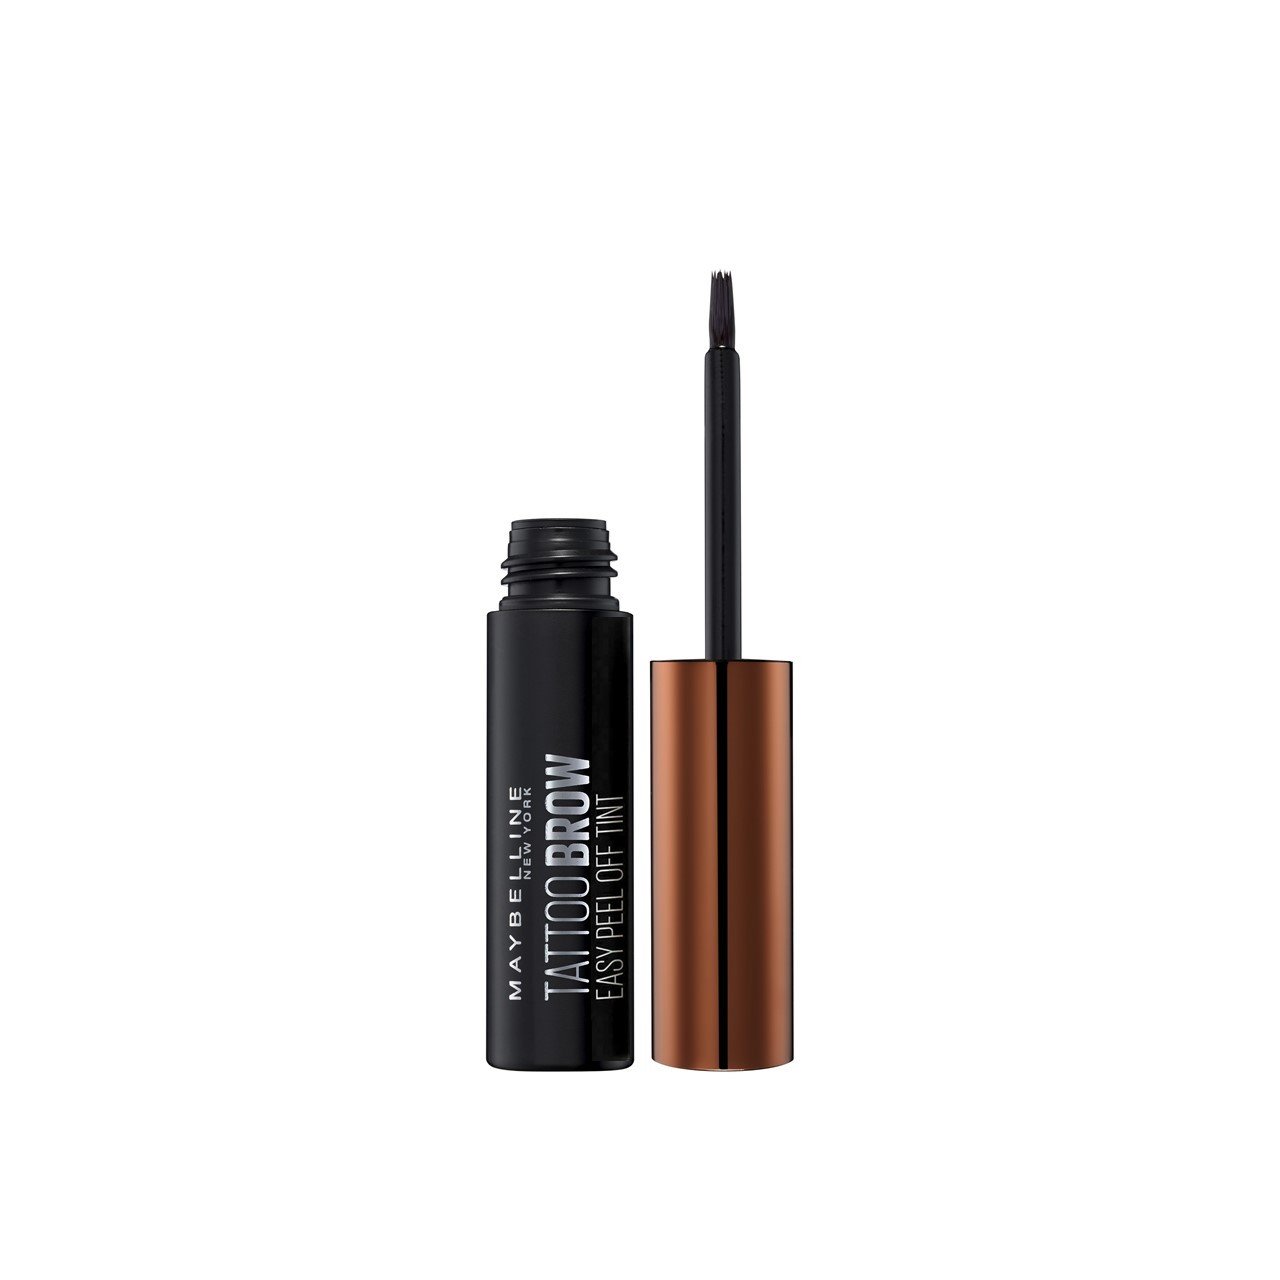 Maybelline Tattoo Brow Easy Peel Off Tint Light Brown 4.6g (0.16oz)